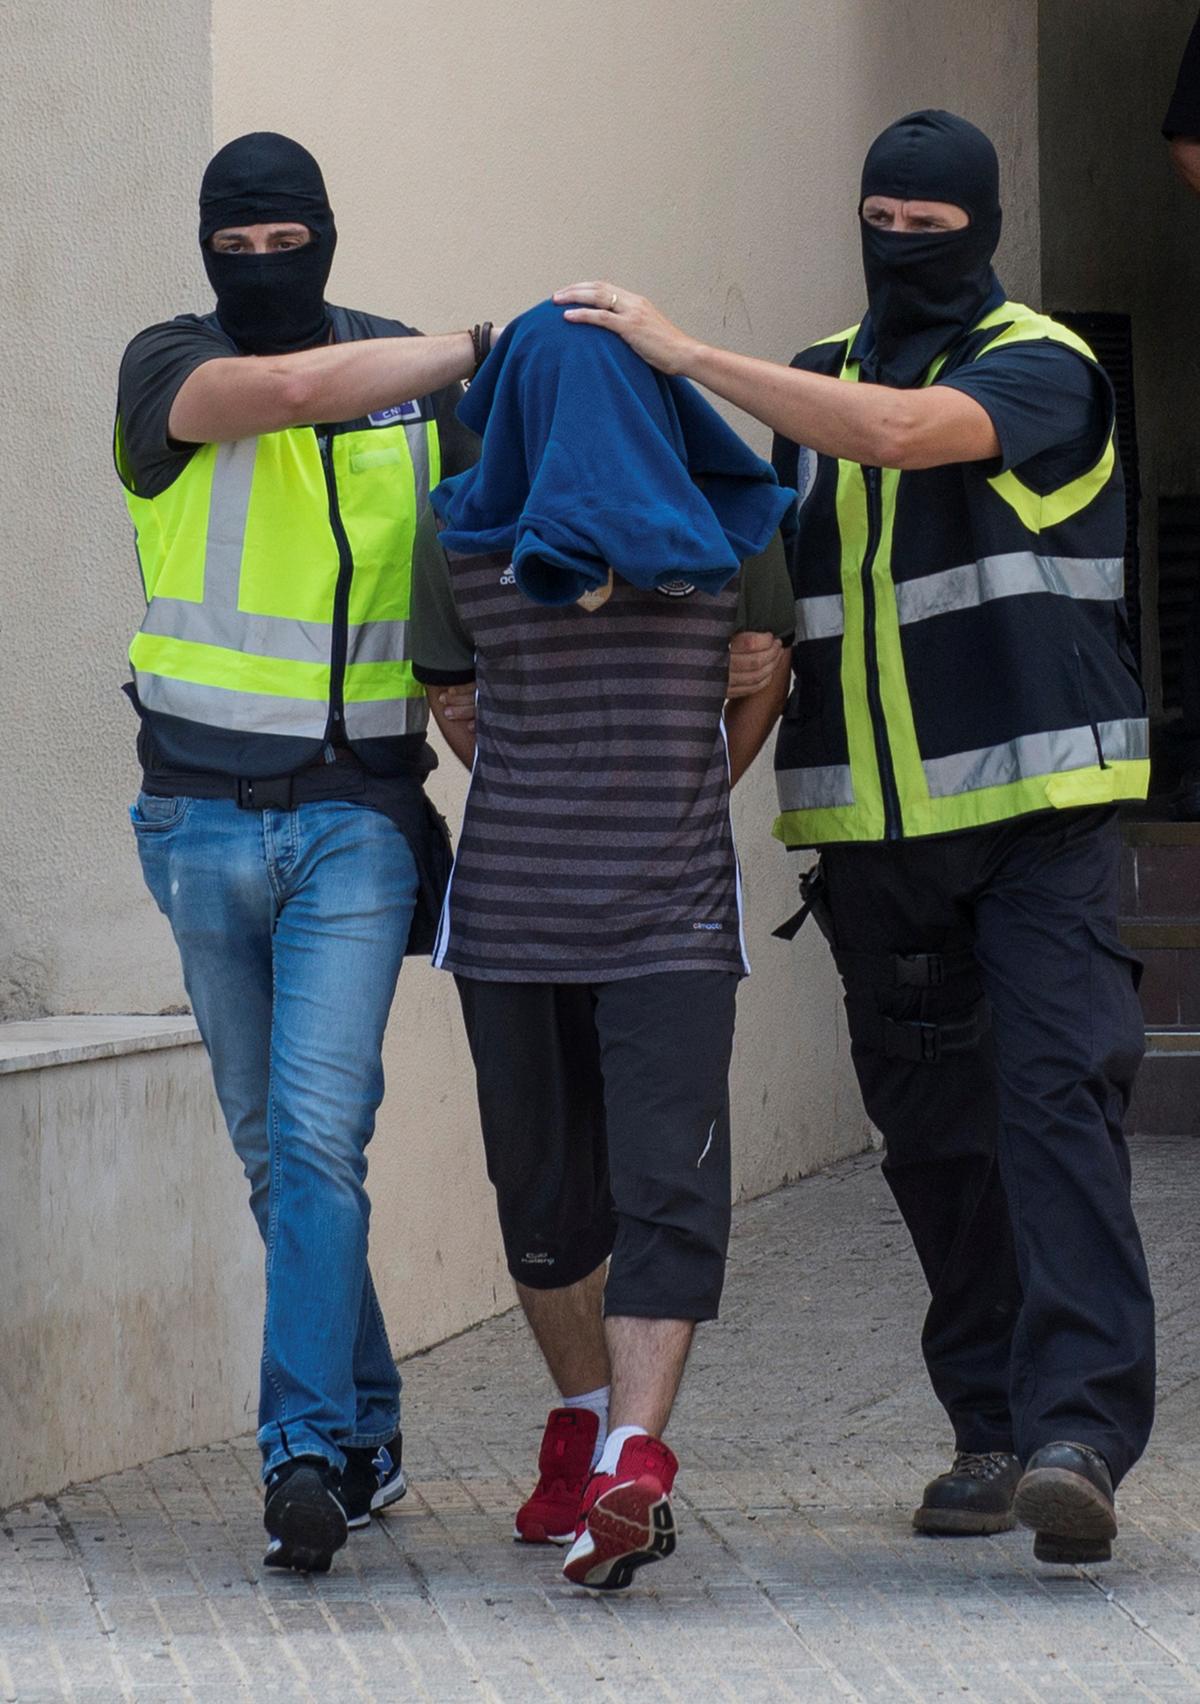 Spanish police lead a man from a police station after he was arrested for allegedly belonging to an Islamist terrorist cell that simulated decapitations in the Spanish north African enclave of Melilla on Sept. 6, 2017. (REUTERS/Jesus Blasco de Avellaneda)